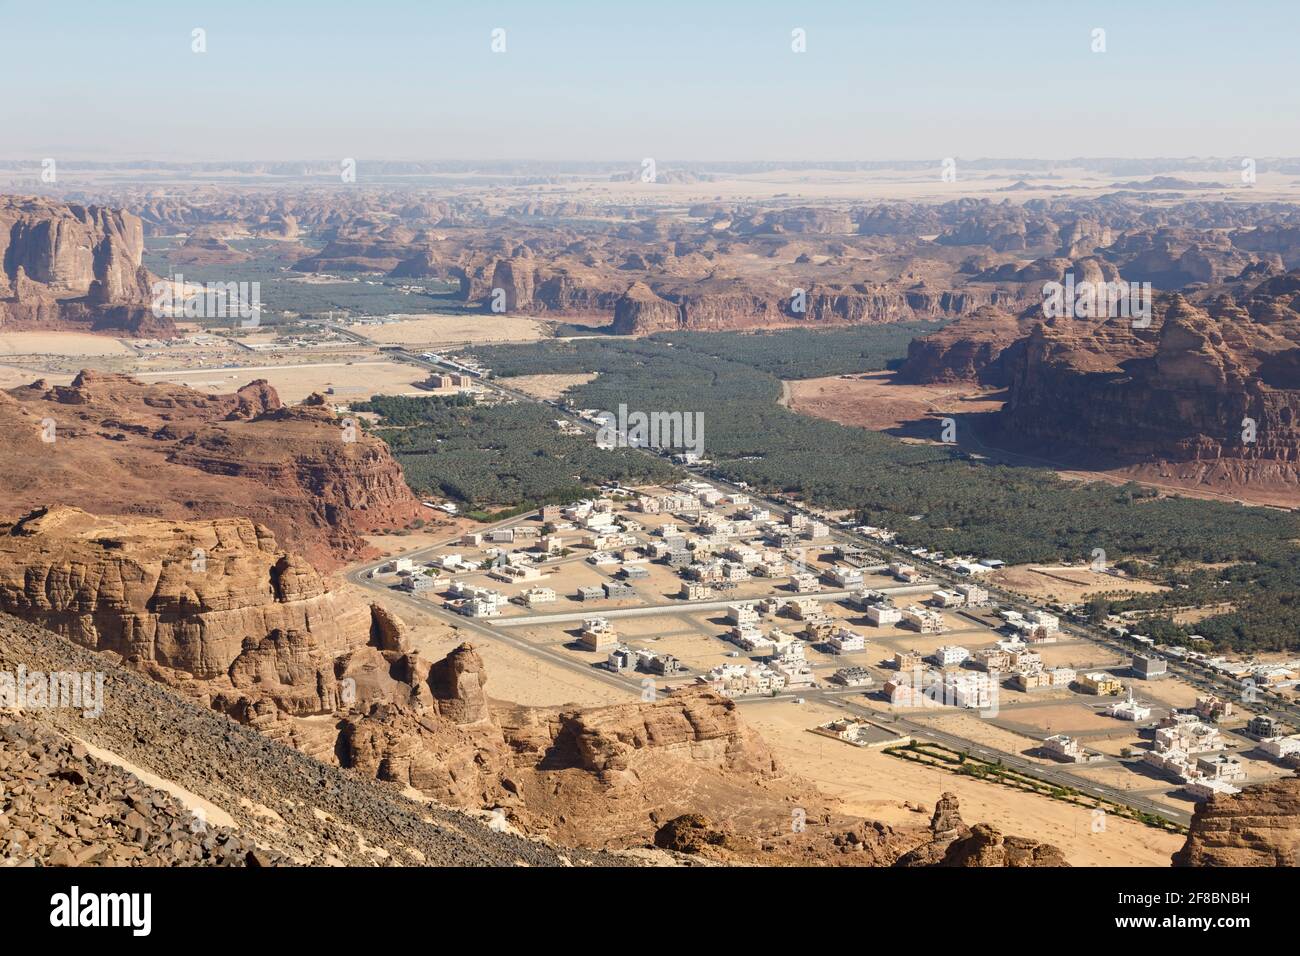 View towards Al Ula, an oasis in the middle of the mountainous landscape of Saudi Arabia Stock Photo